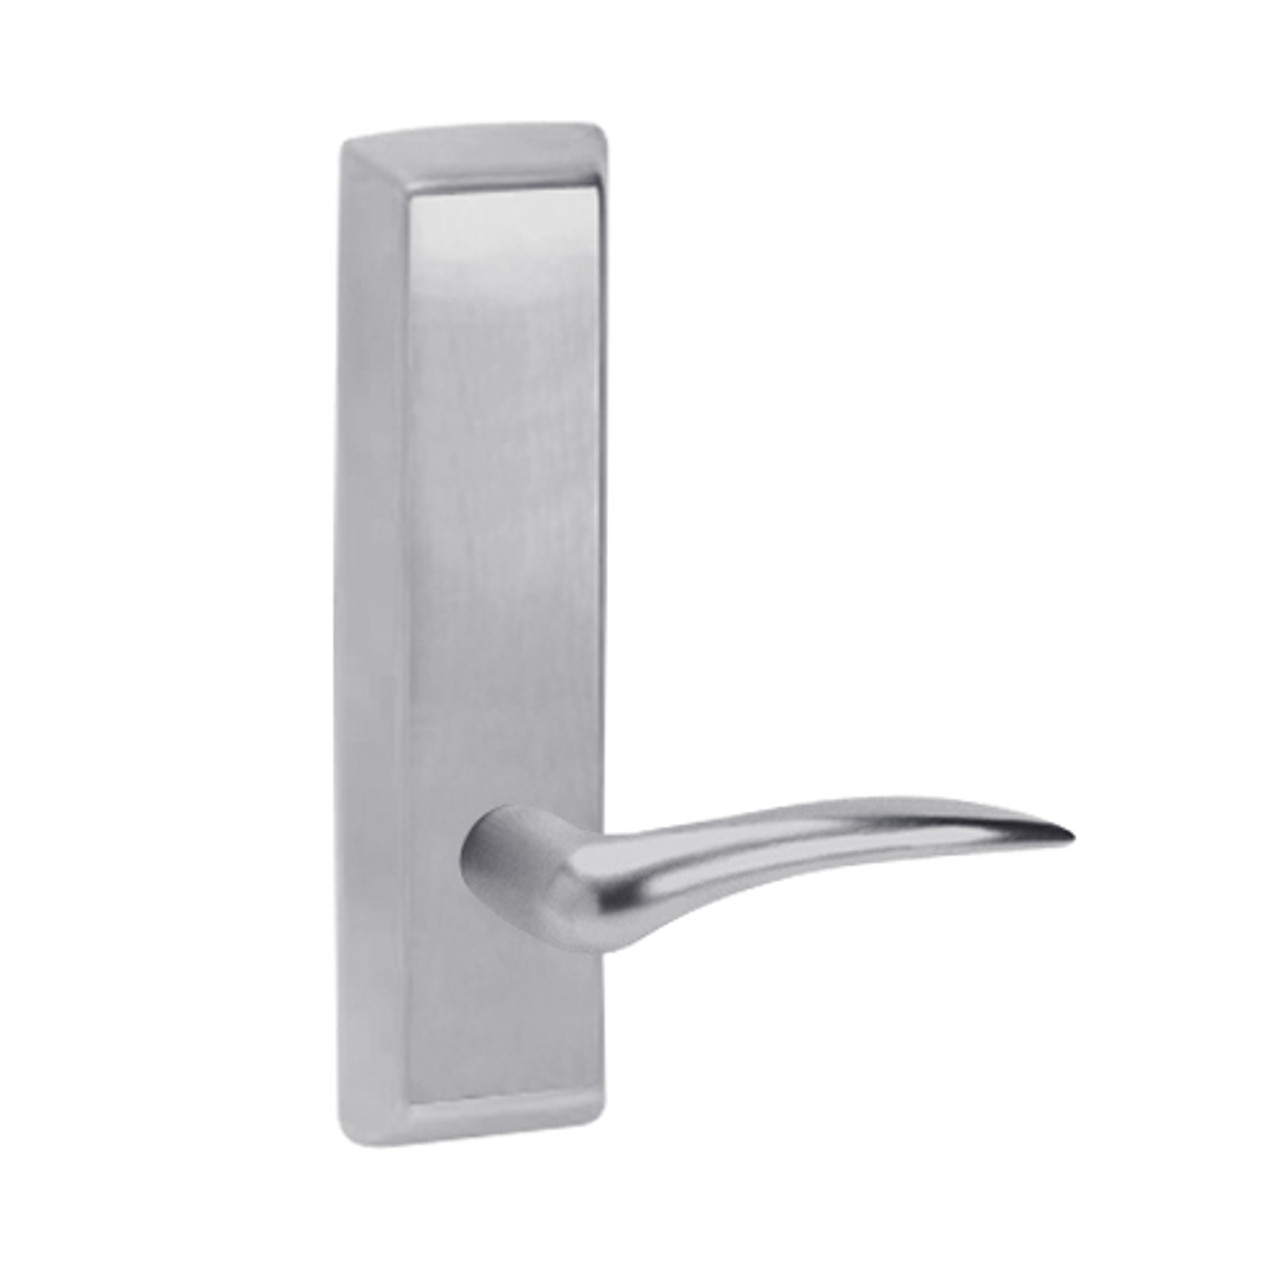 D955-626-RHR Corbin ED5000 Series Exit Device Trim with Classroom Dirke Lever in Satin Chrome Finish